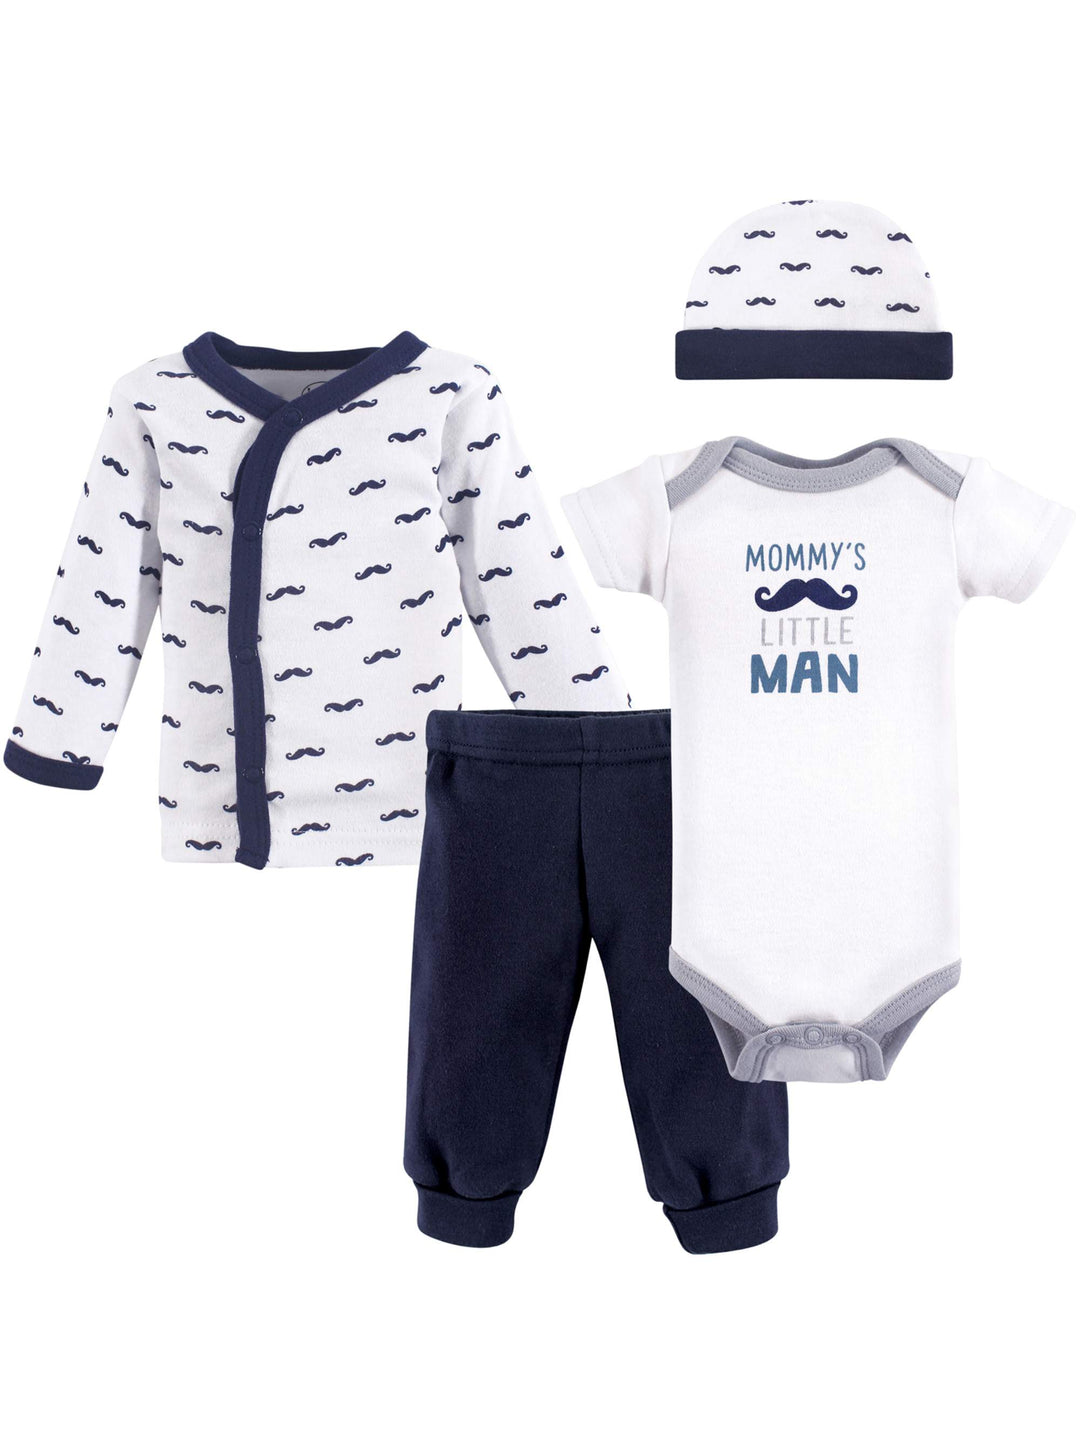 Mustache 4 Piece Preemie Boys Outfit Set. Includes Long sleeve kimono style top, short sleeve onesie, pants, and a matching cap